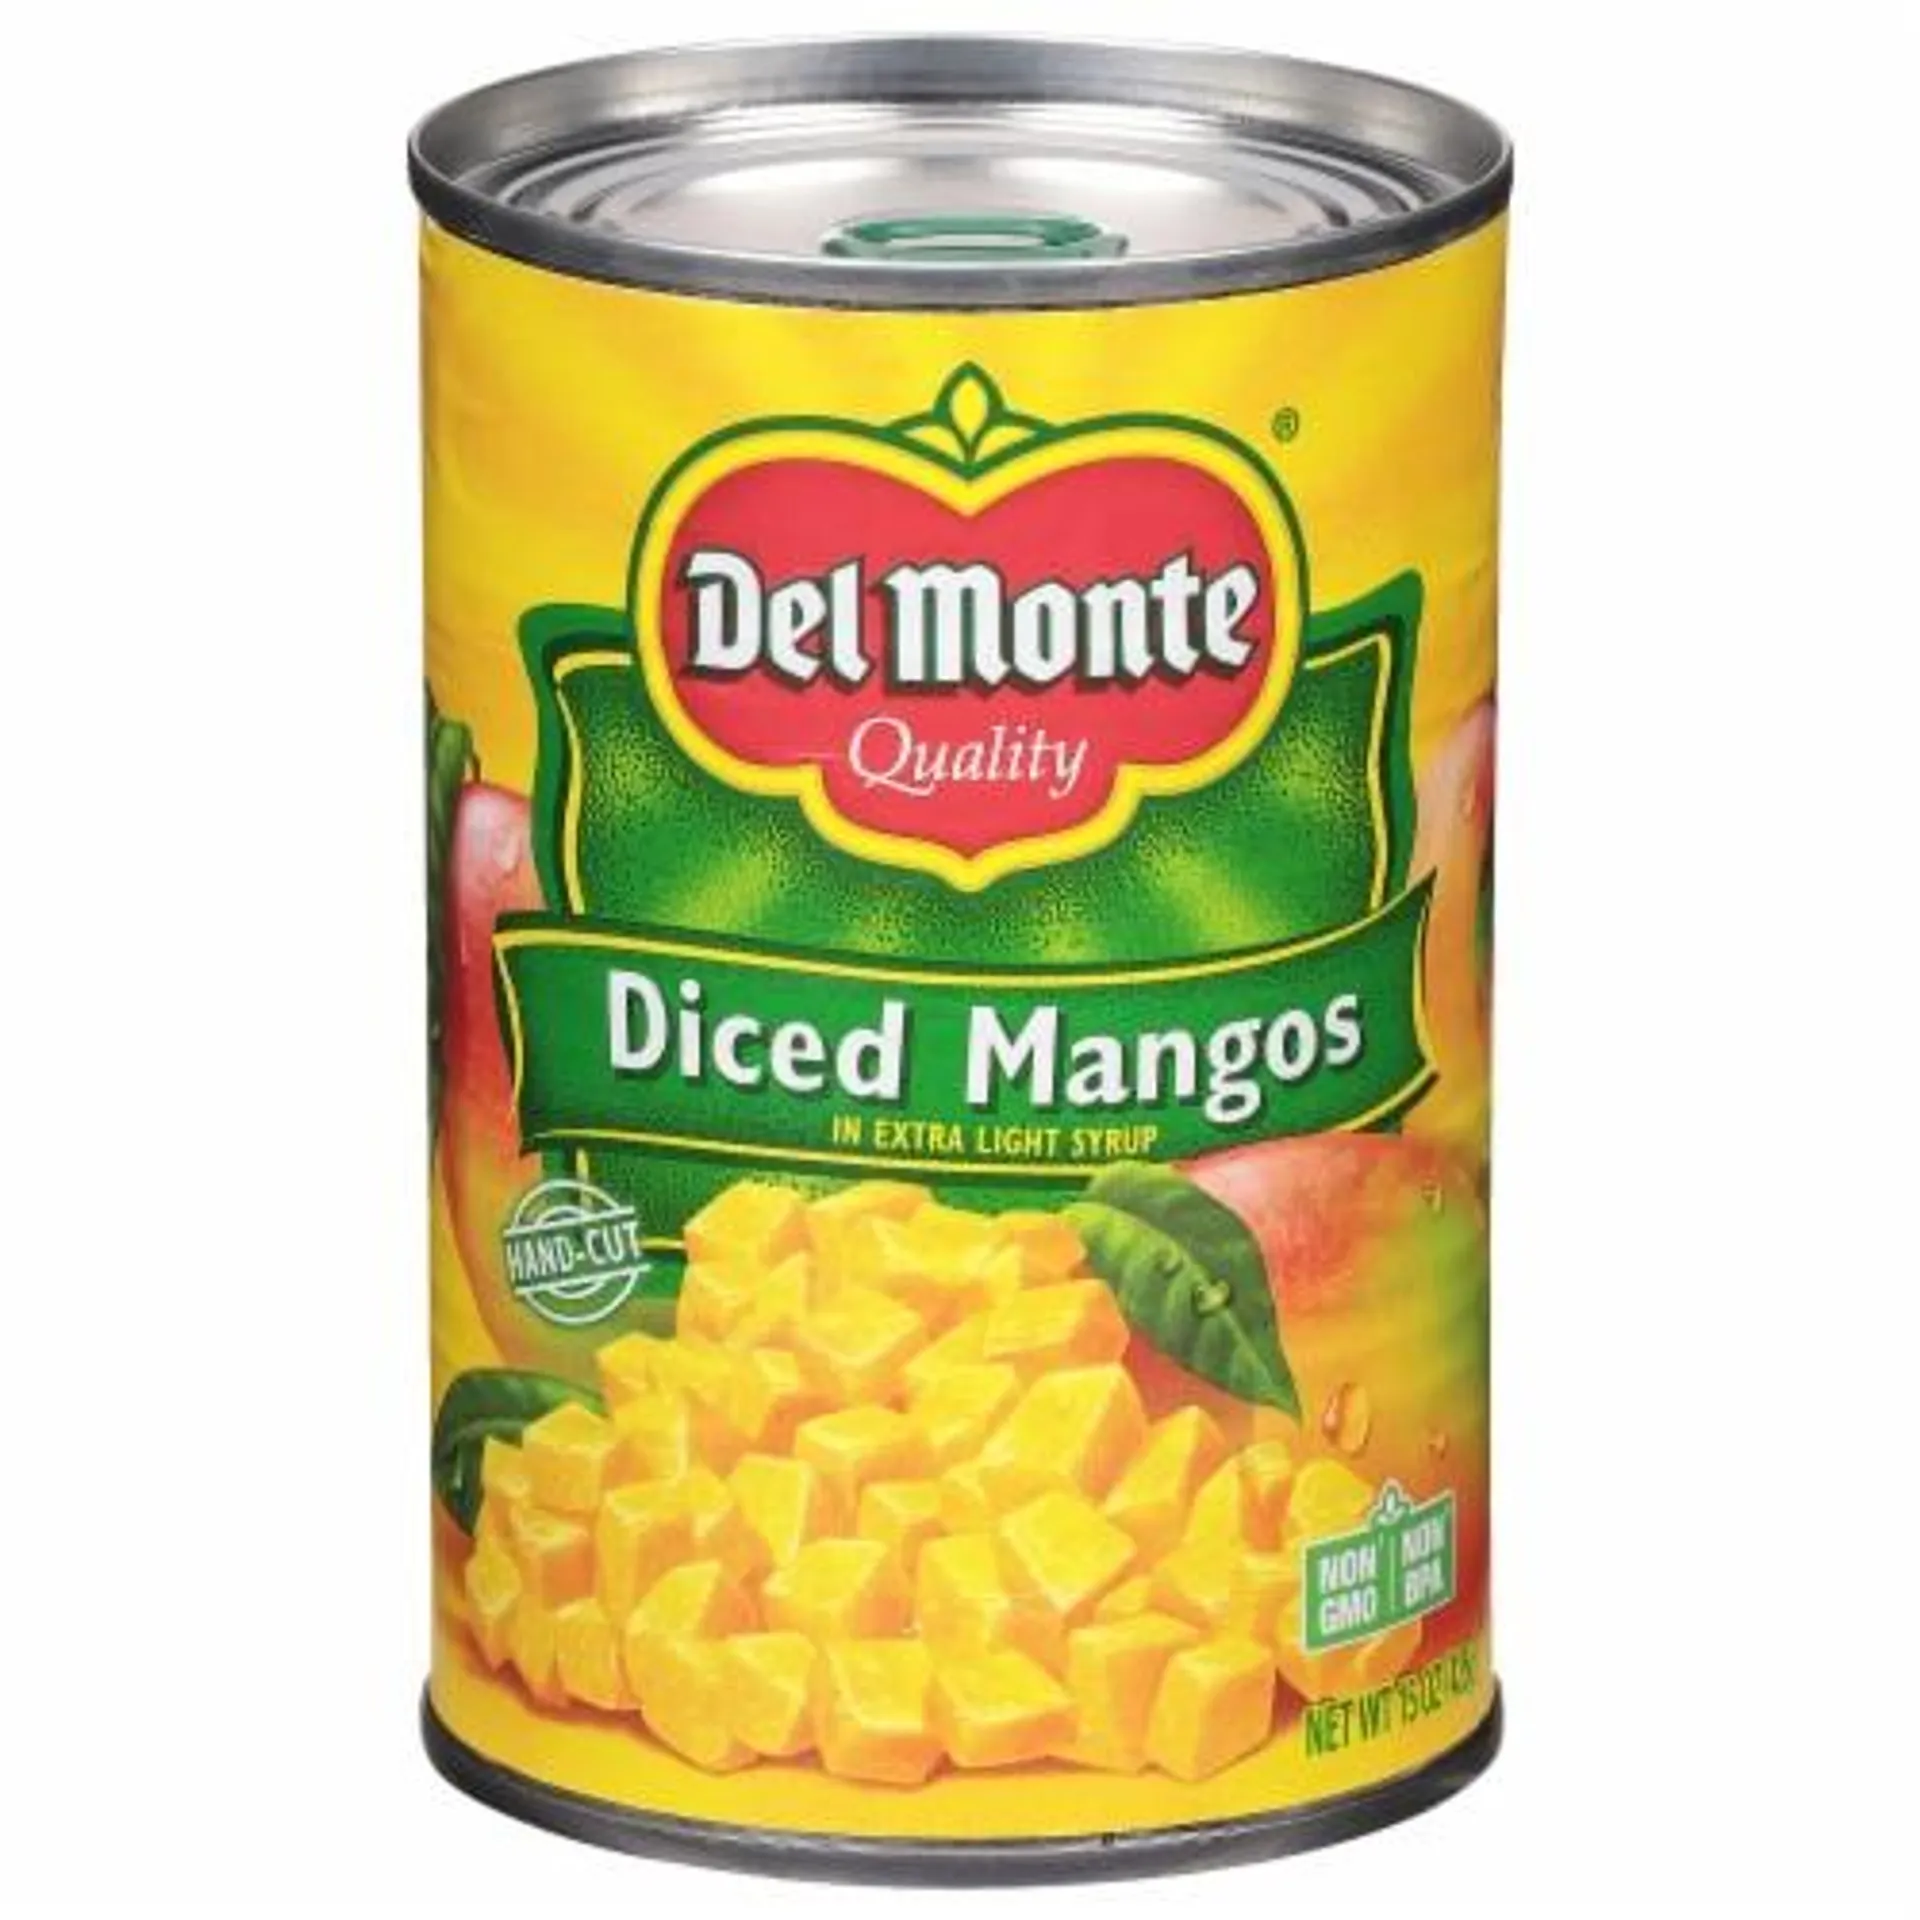 Del Monte® Diced Mango in Extra Light Syrup Canned Fruit